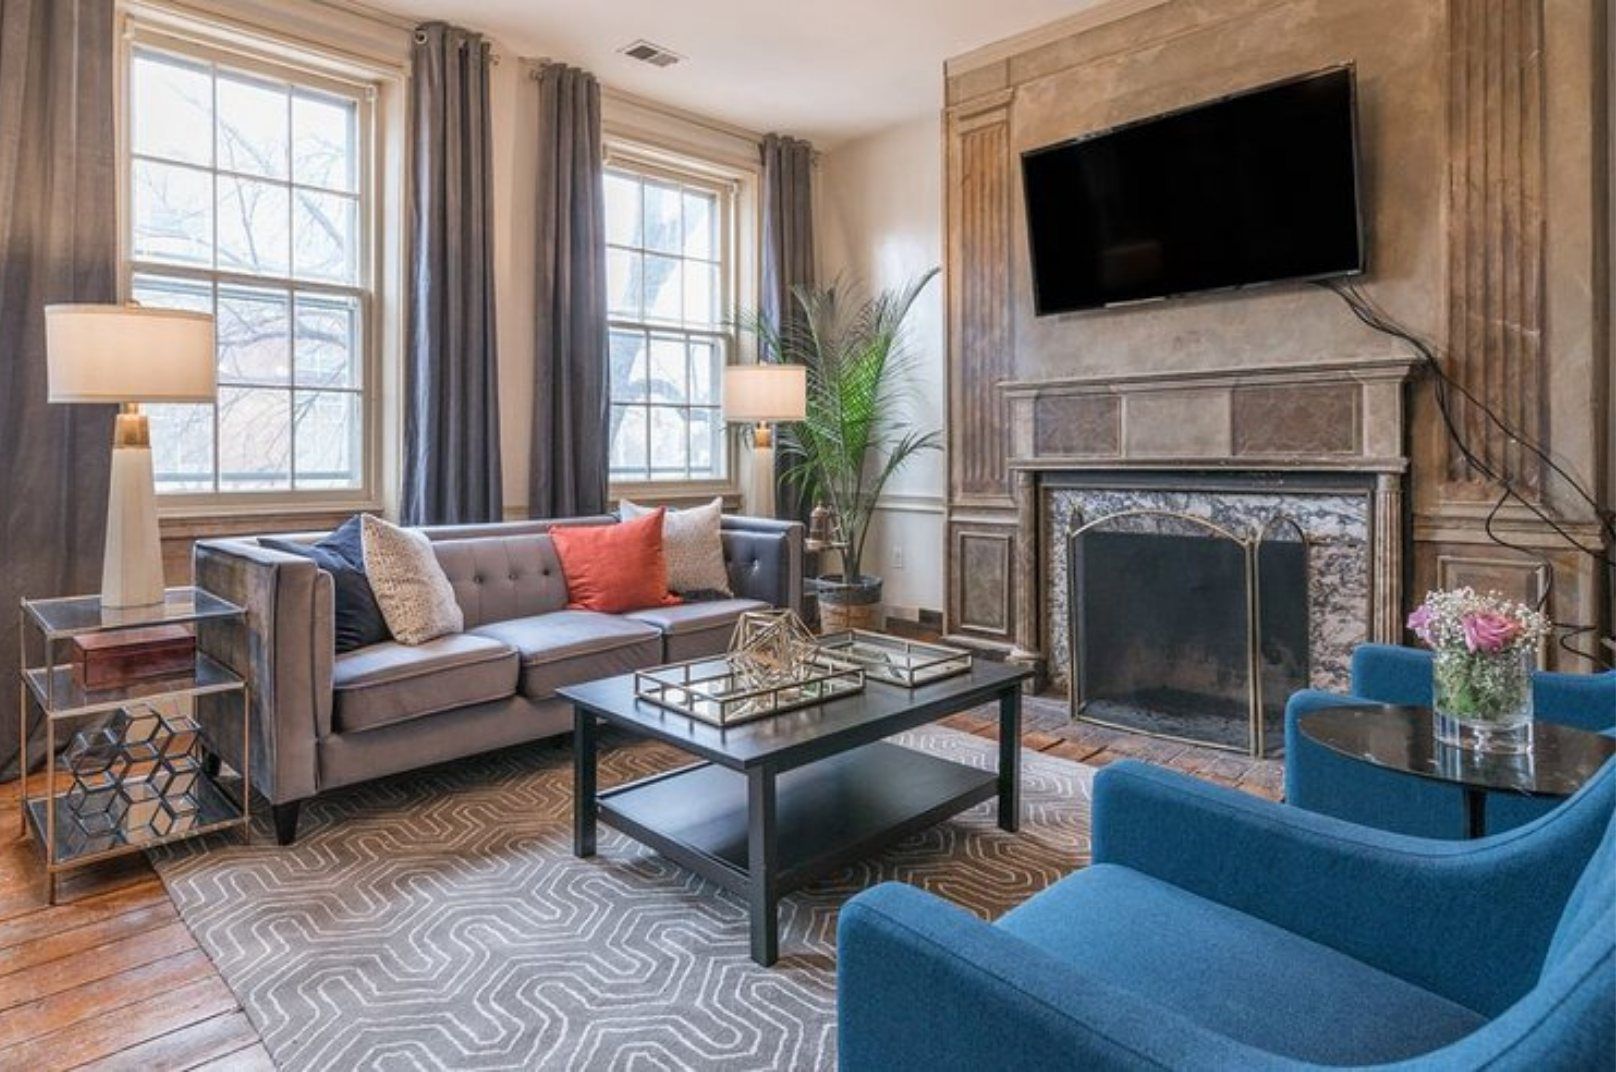 The Best Airbnbs in Washington D.C.